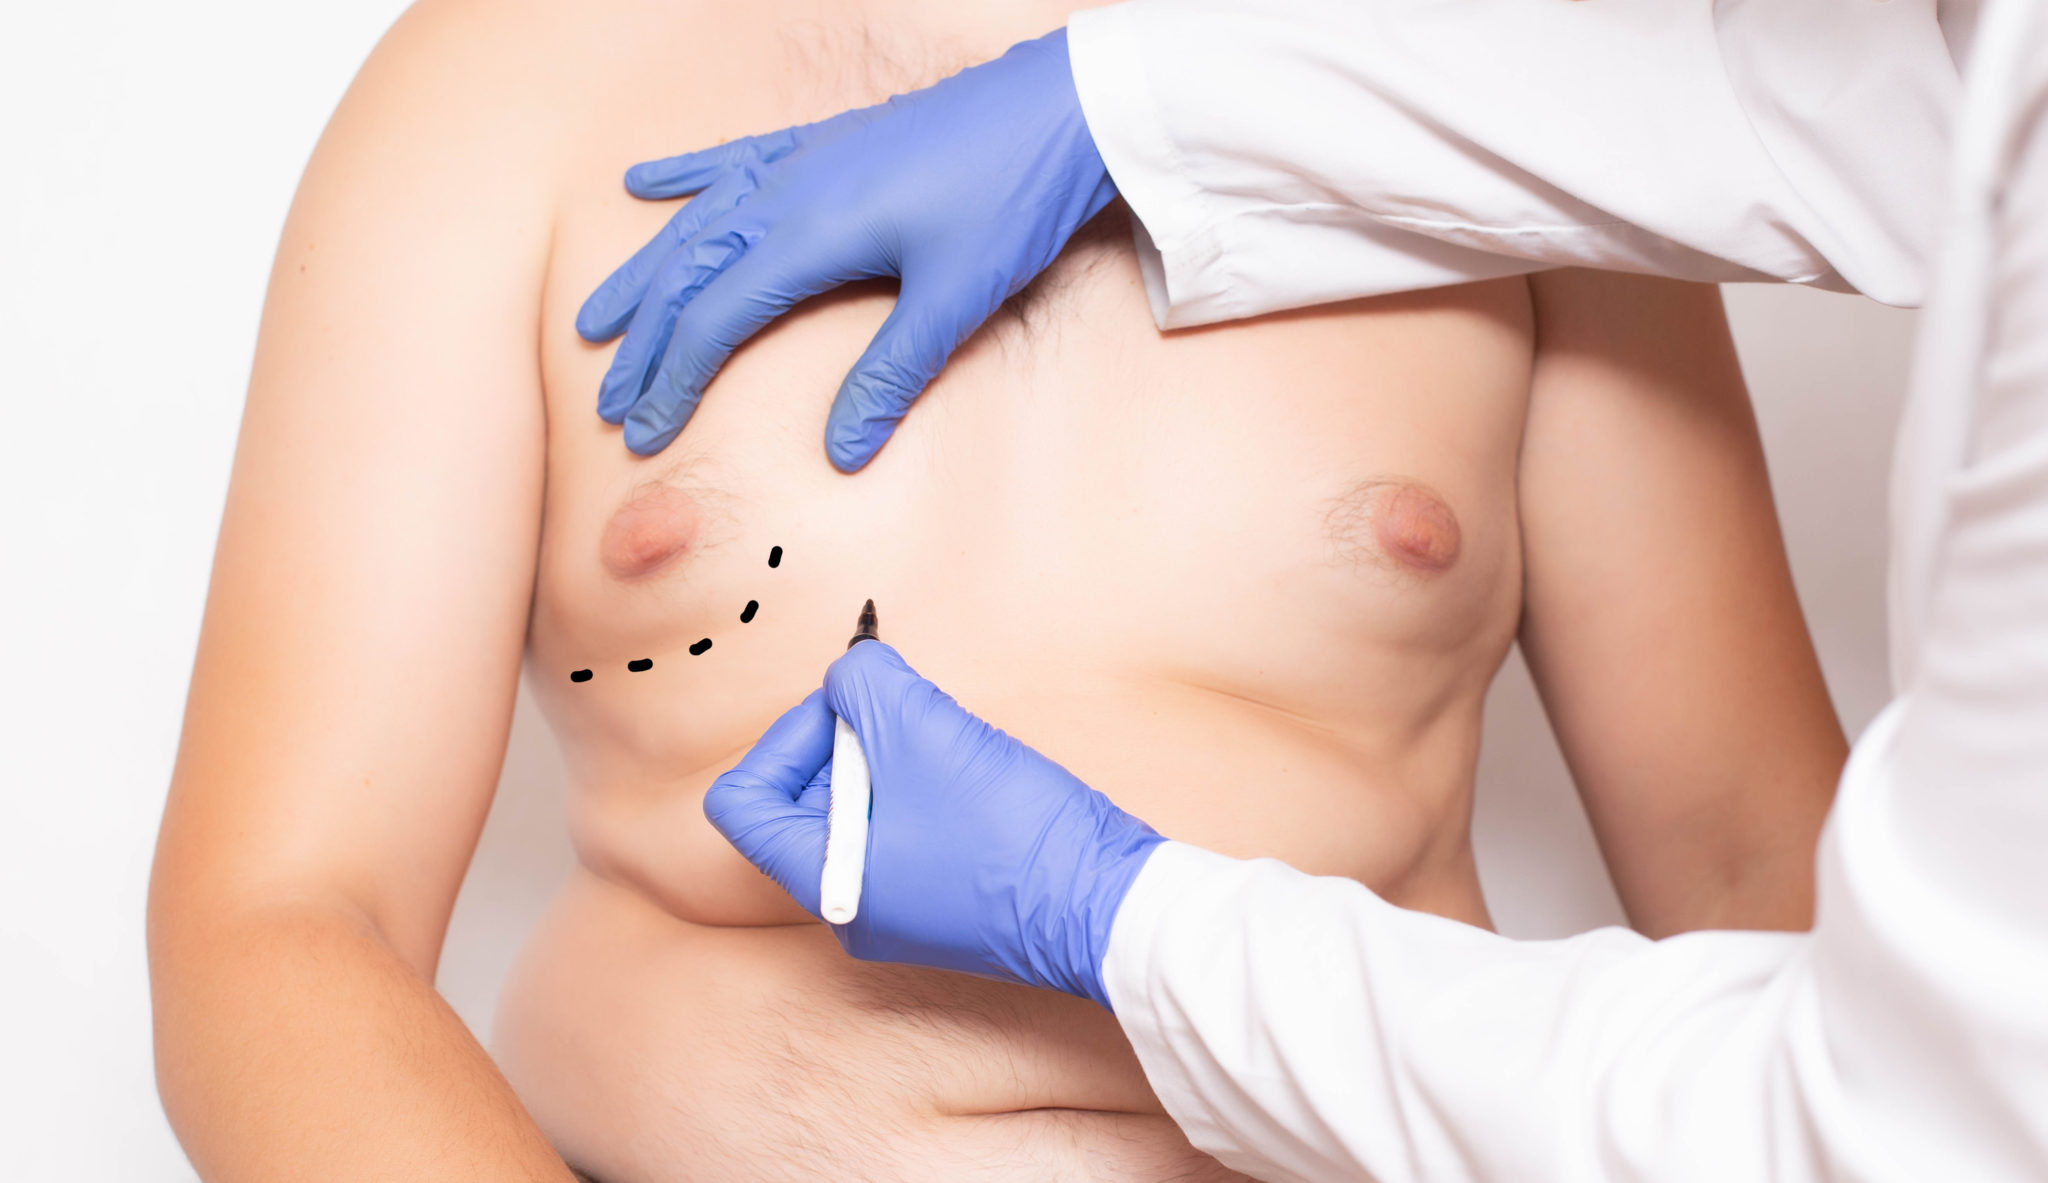 doctor in blue gloves marking overweight male's right breast for surgery